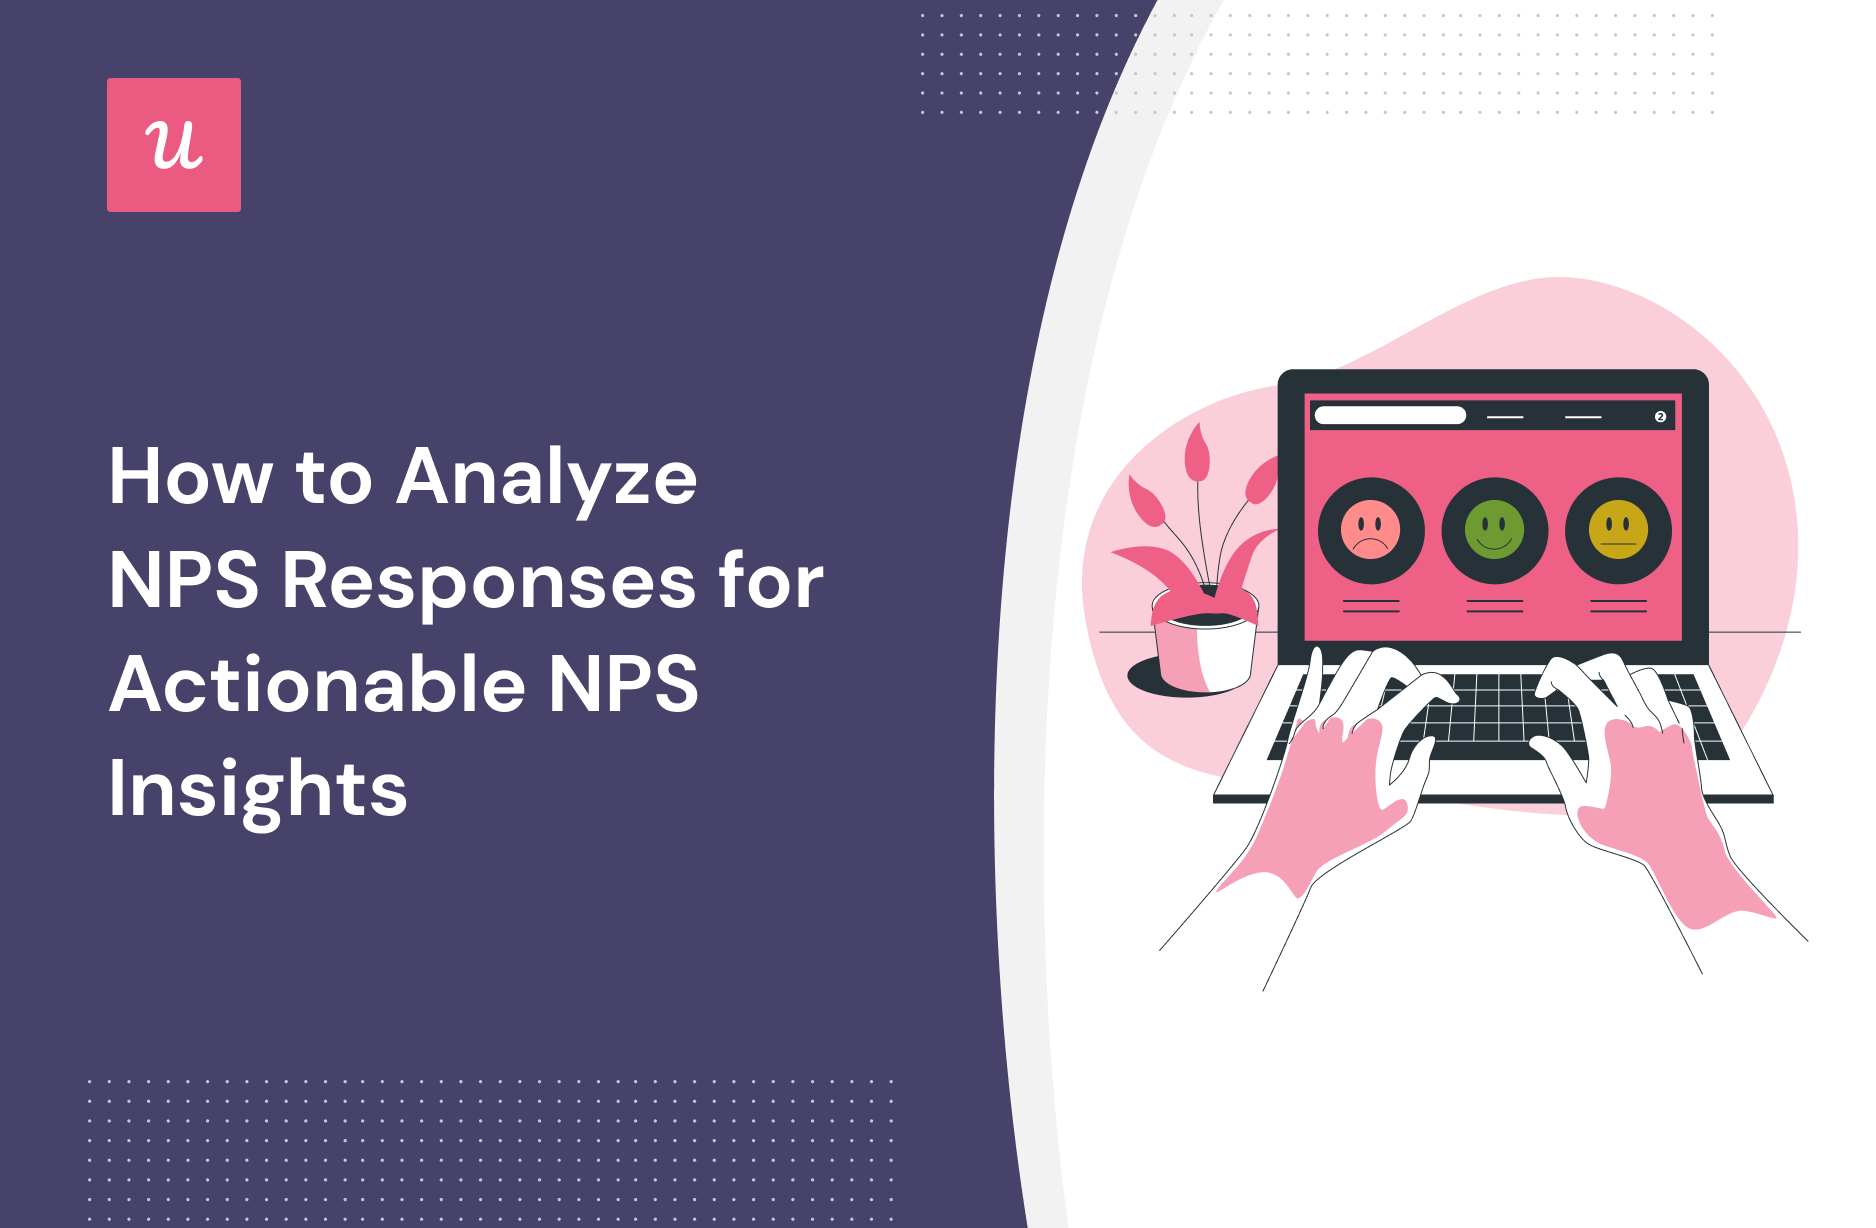 How to Analyze NPS Responses for Actionable NPS Insights